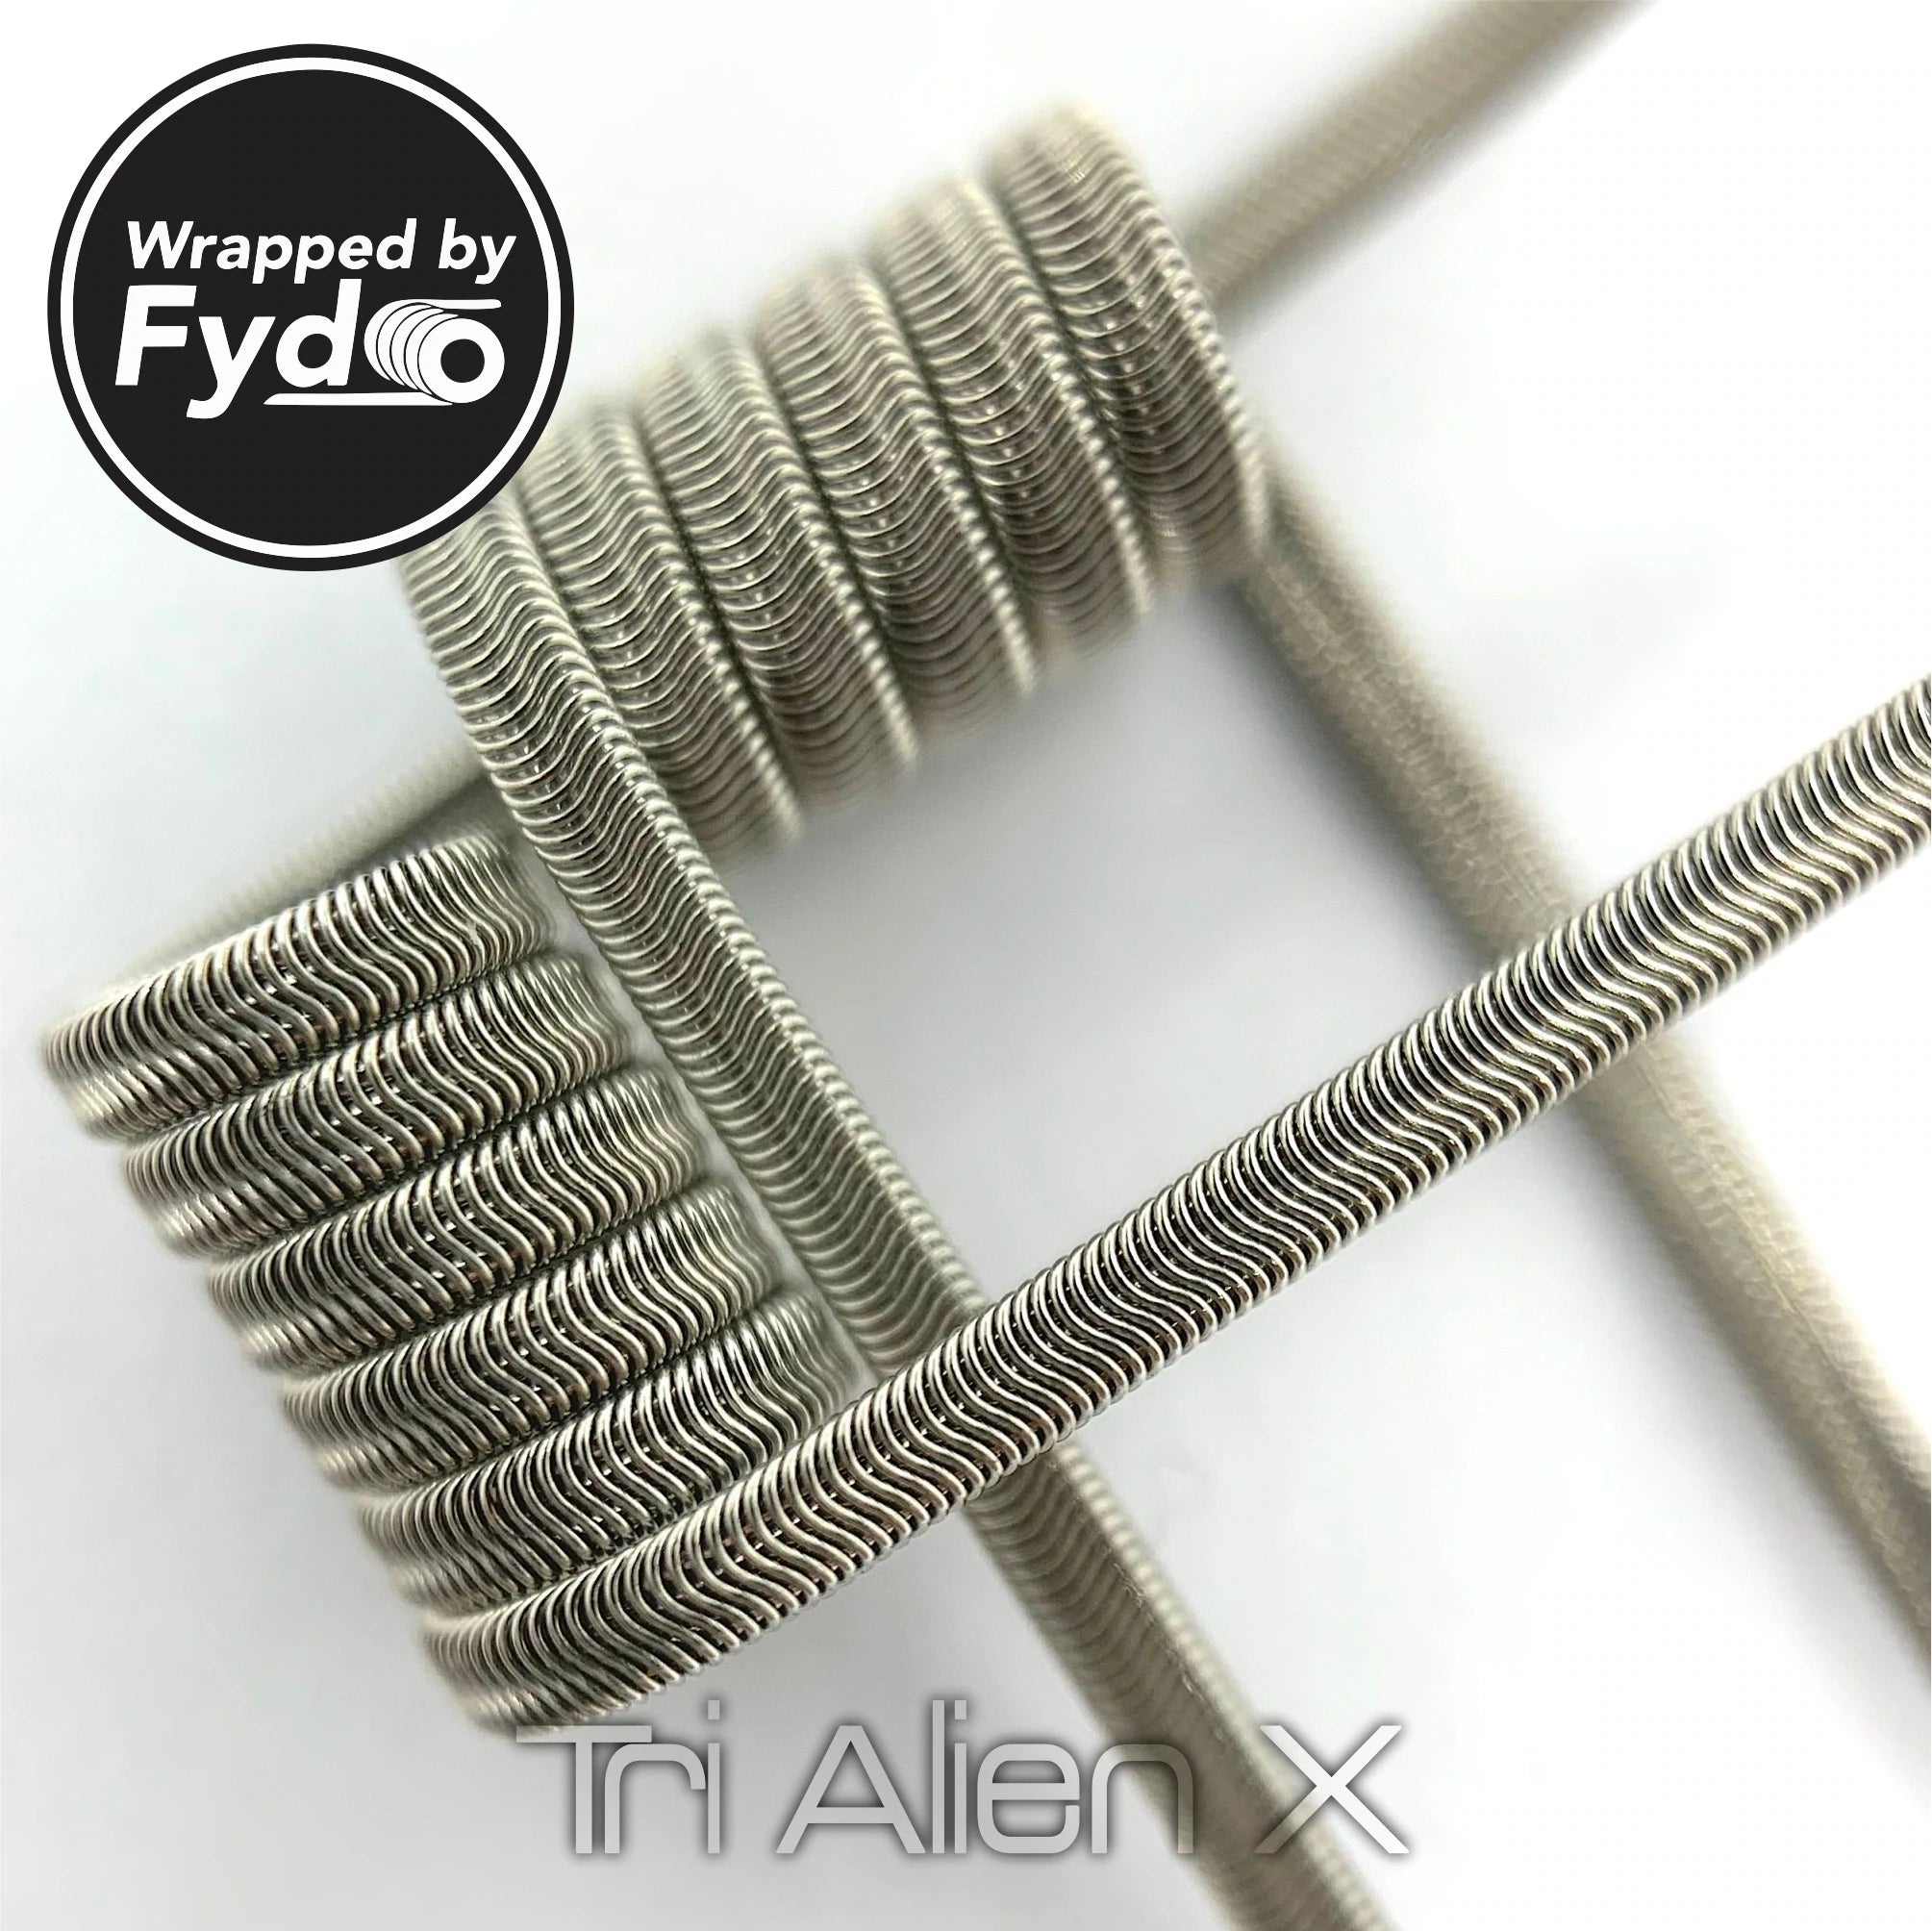 Wrapped by Fydo | Tri Alien X Coils